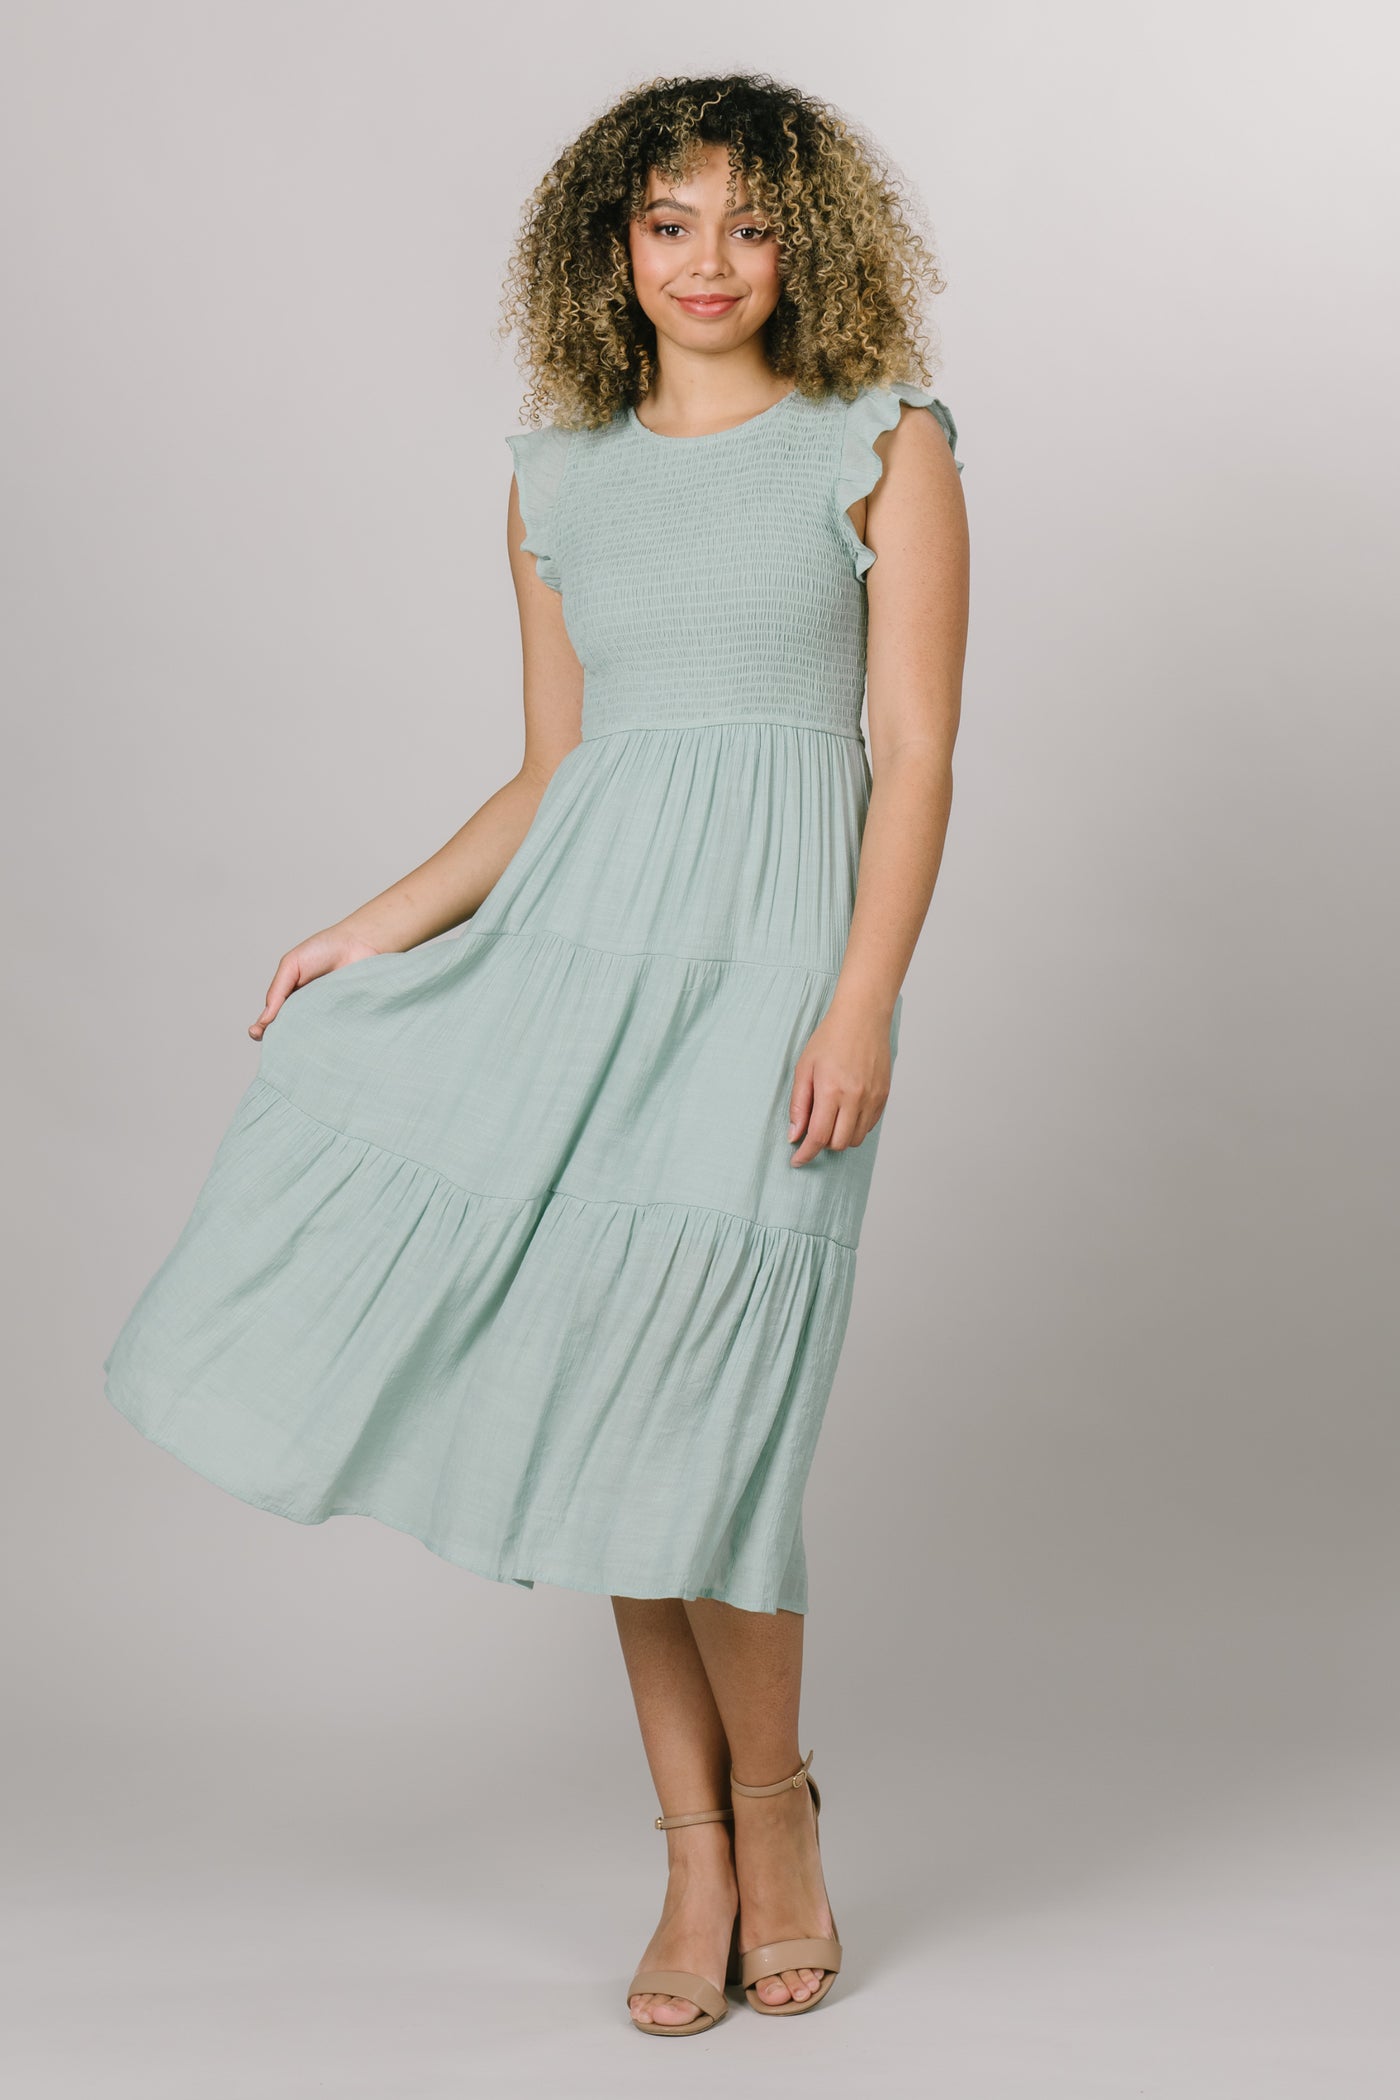 Smocked bodice and a high neckline in the shape of a scoop. Modest Dresses - - Everyday Dresses - Modest Prom Dress - Formalwear Modest Dresses - Bridesmaid Modest Dresses.